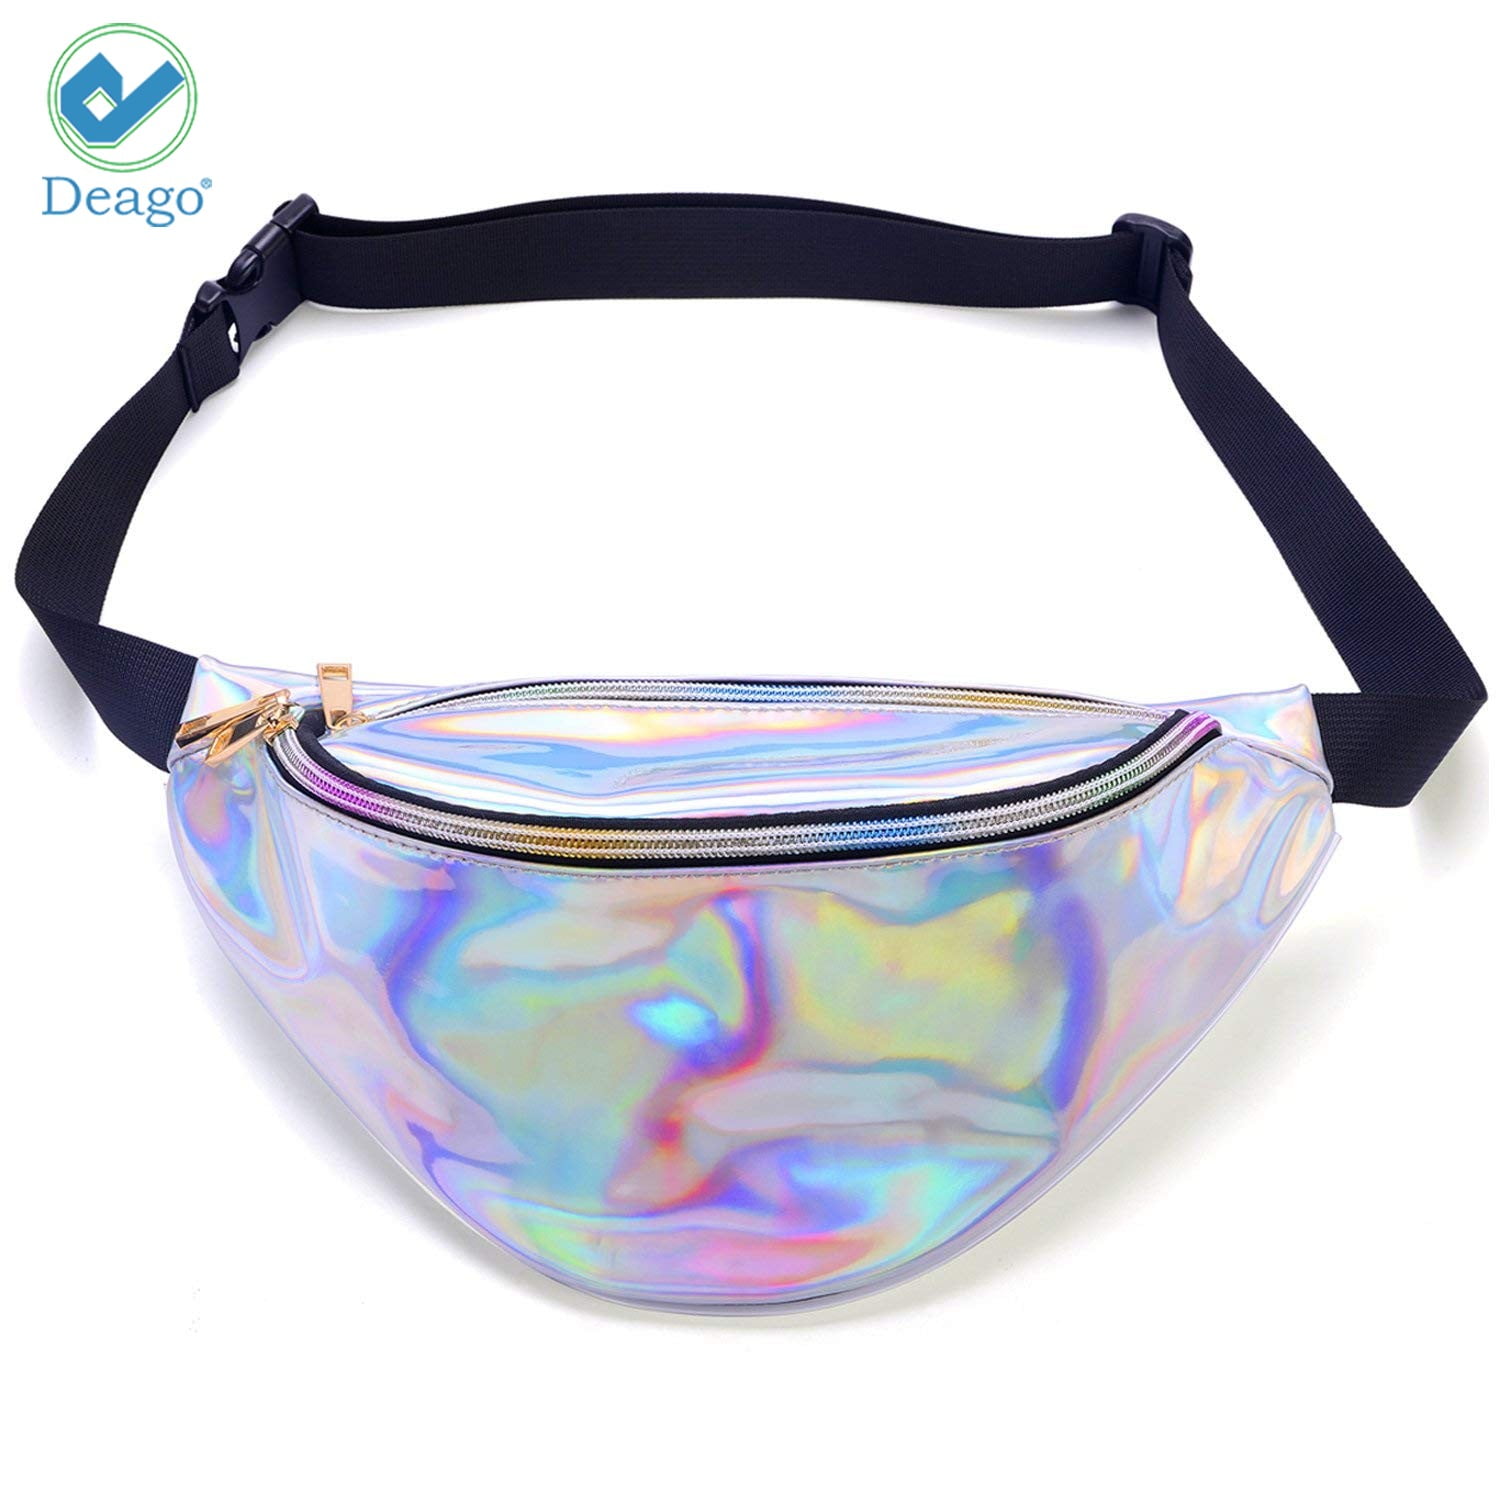 Neon Rave Waist Fanny Pack with Adjustable Belt for Festival Party Travel Holographic Fanny Pack for Women & Men 